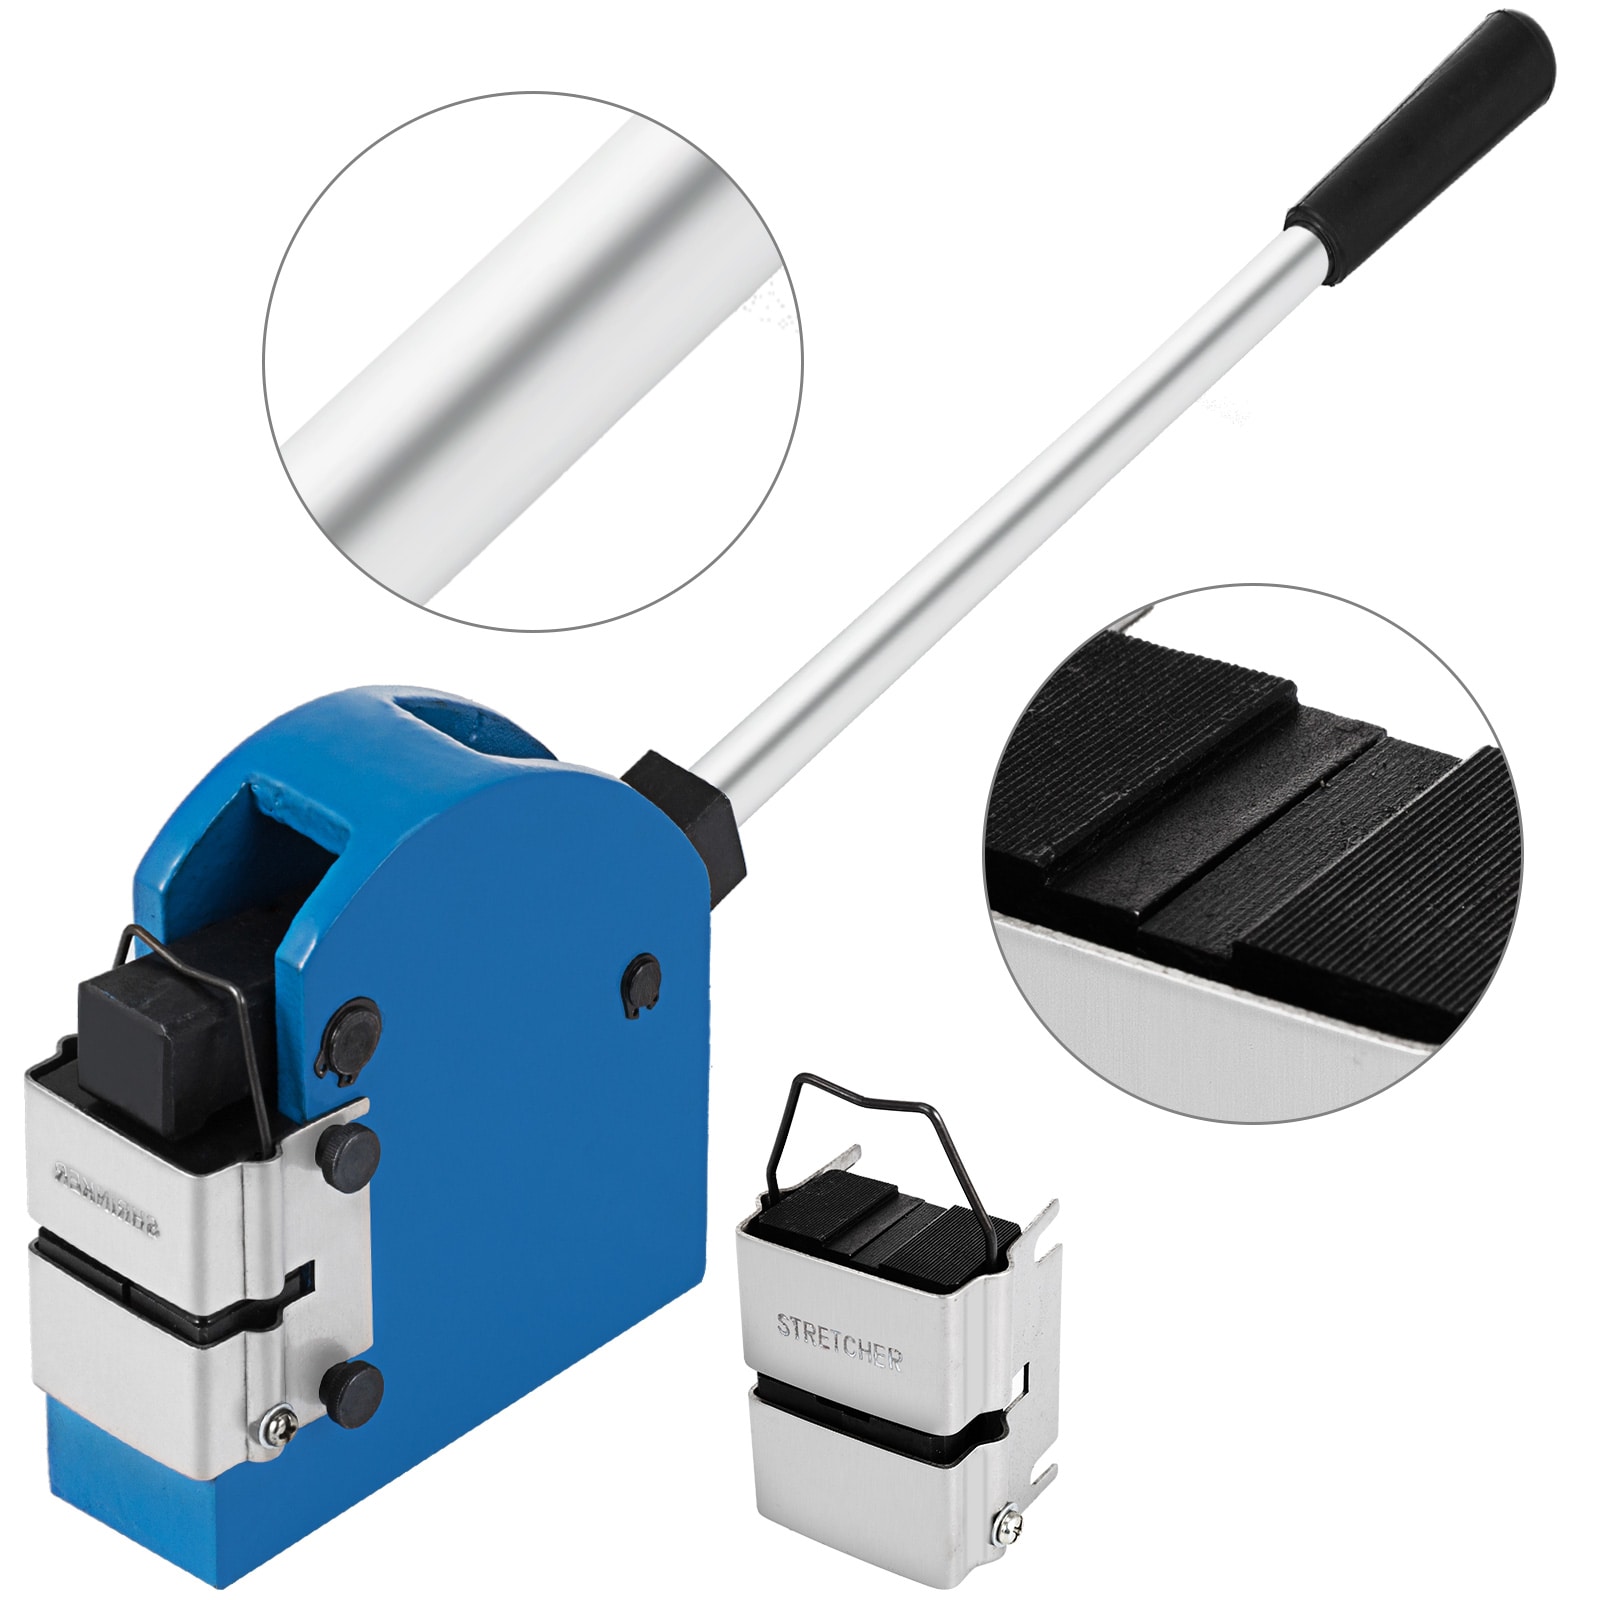 VEVOR Manual Die Cutter - Tool Review 